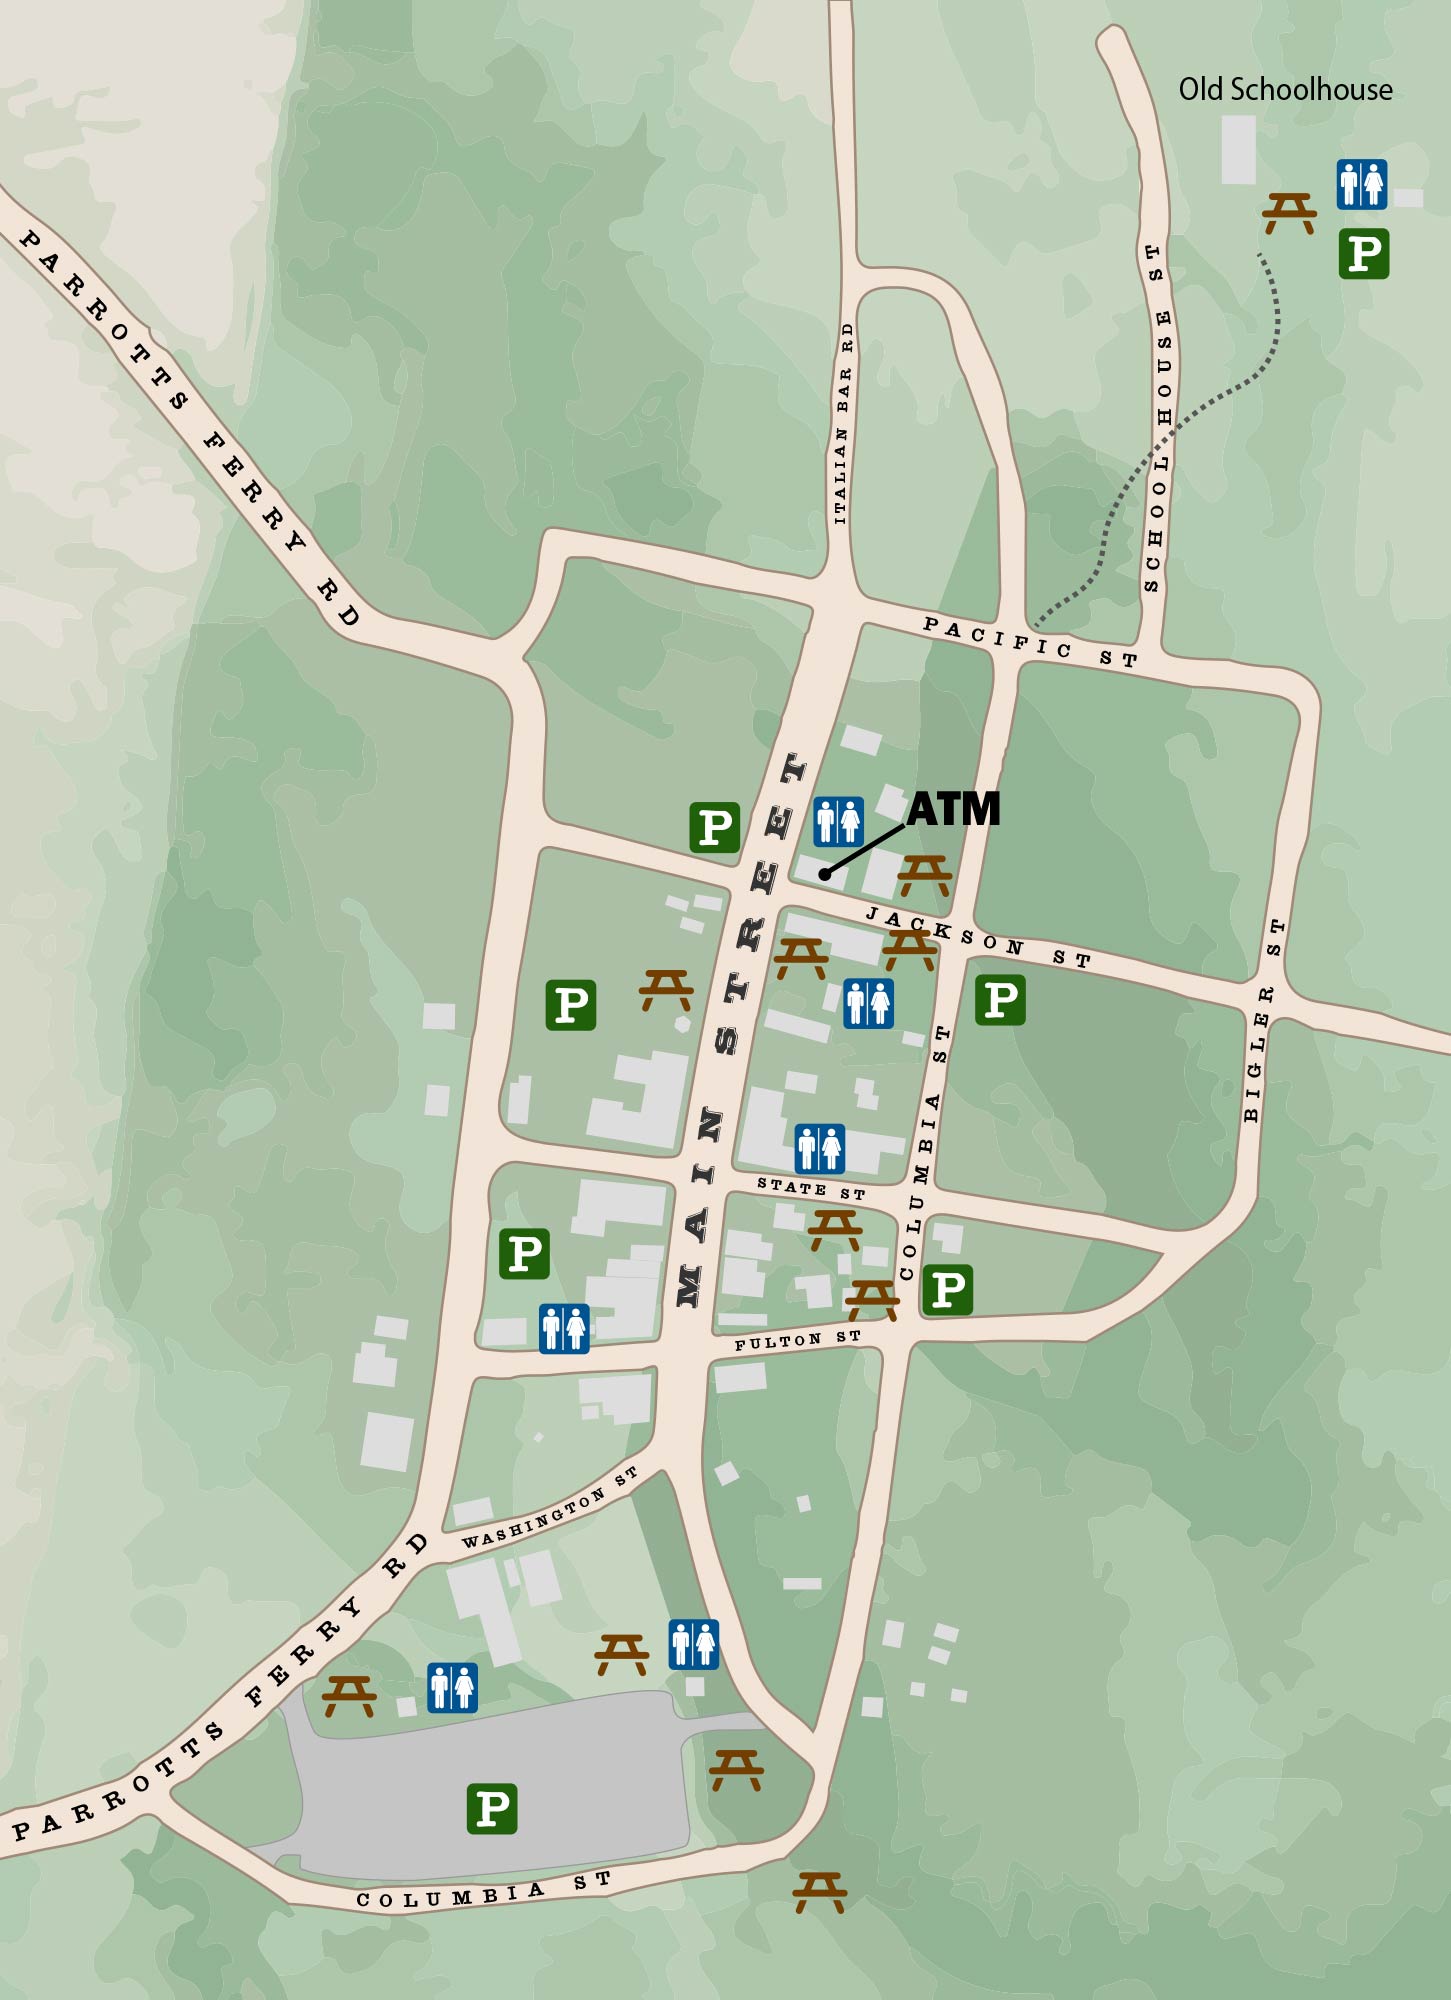 Columbia map showing locations for parking, restrooms, and picnic areas.